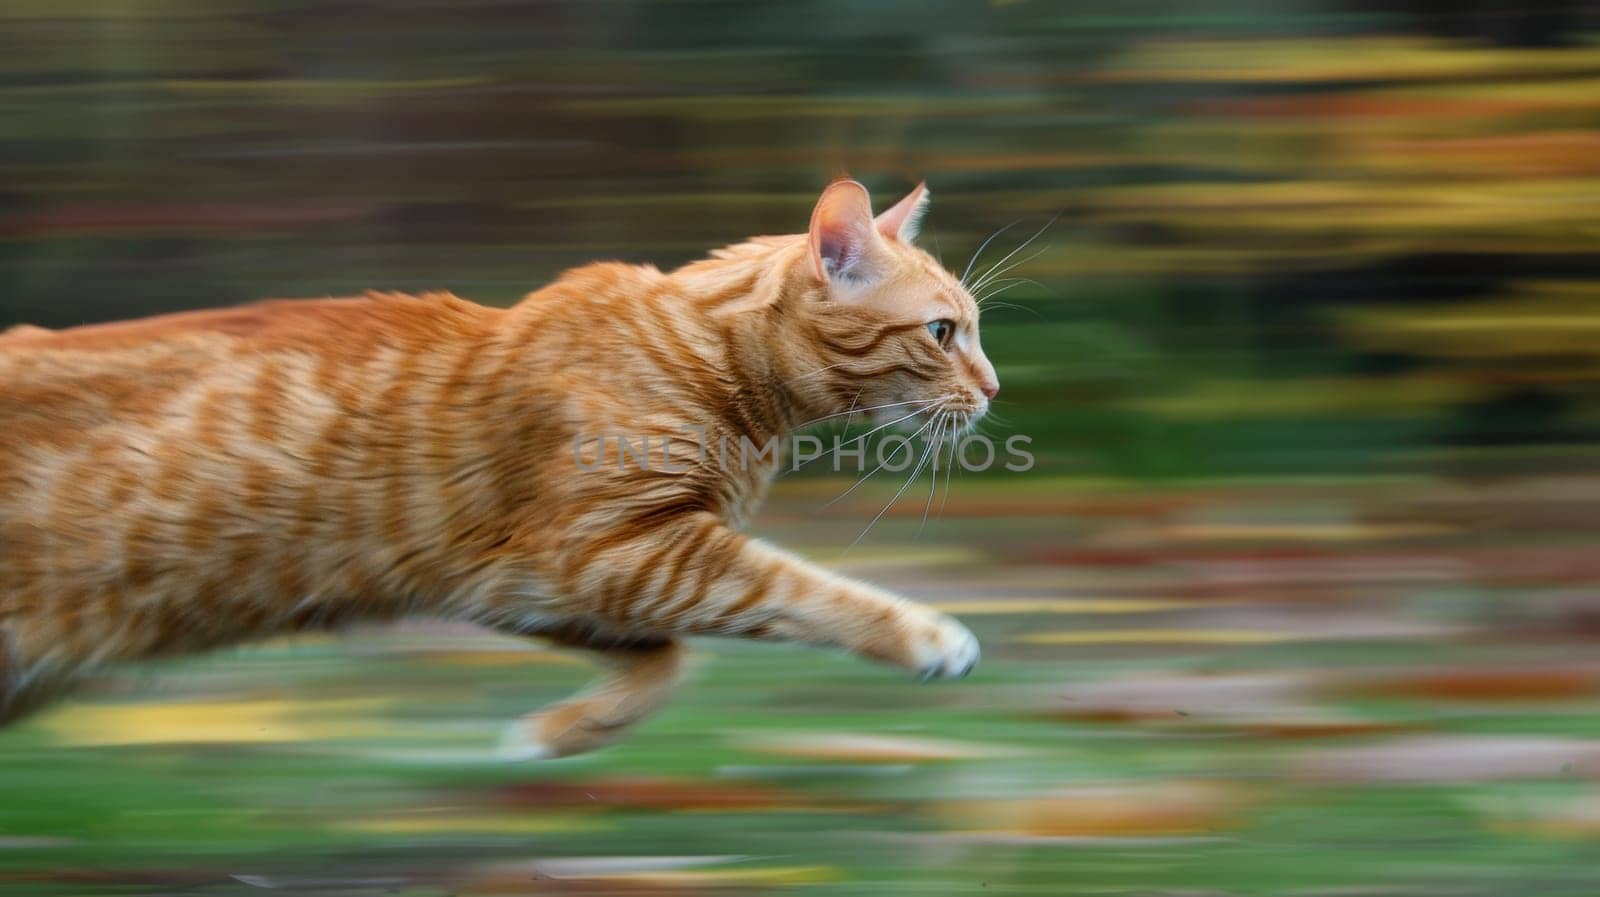 A cat running across a grassy field with blurred background, AI by starush